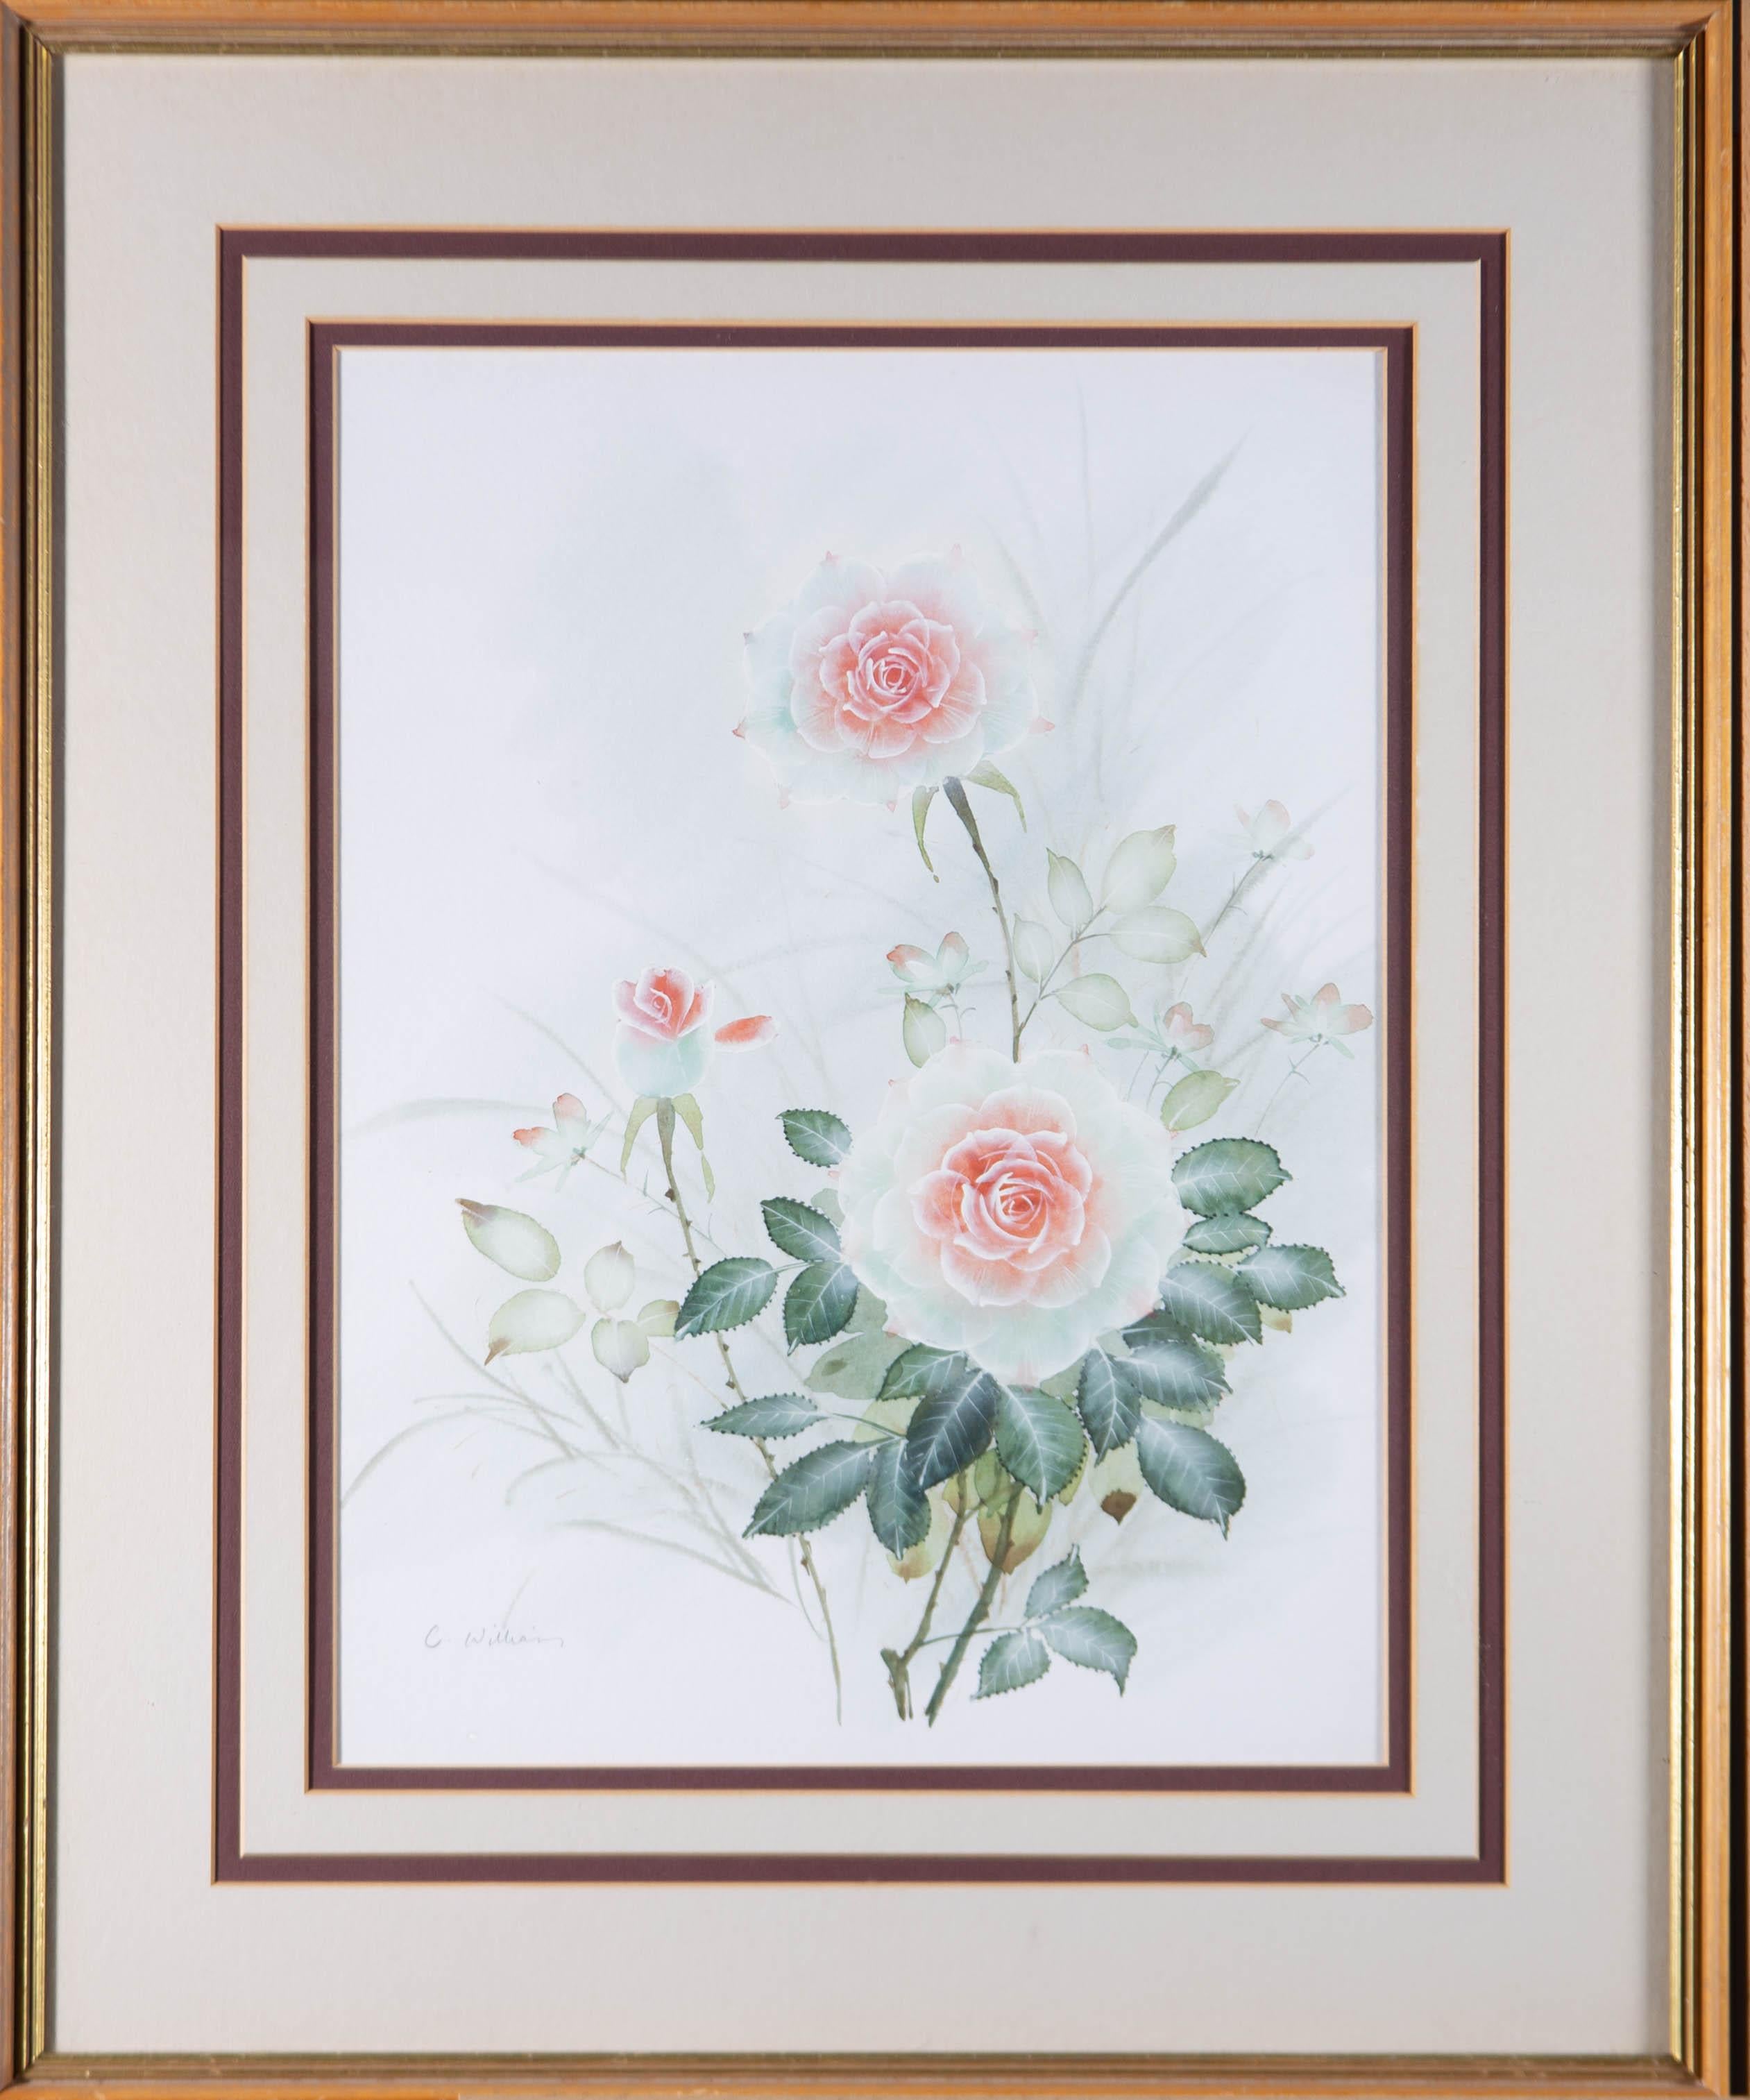 Unknown Still-Life - C. Williams - Signed & Framed Mid 20th Century Watercolour, Rose Study